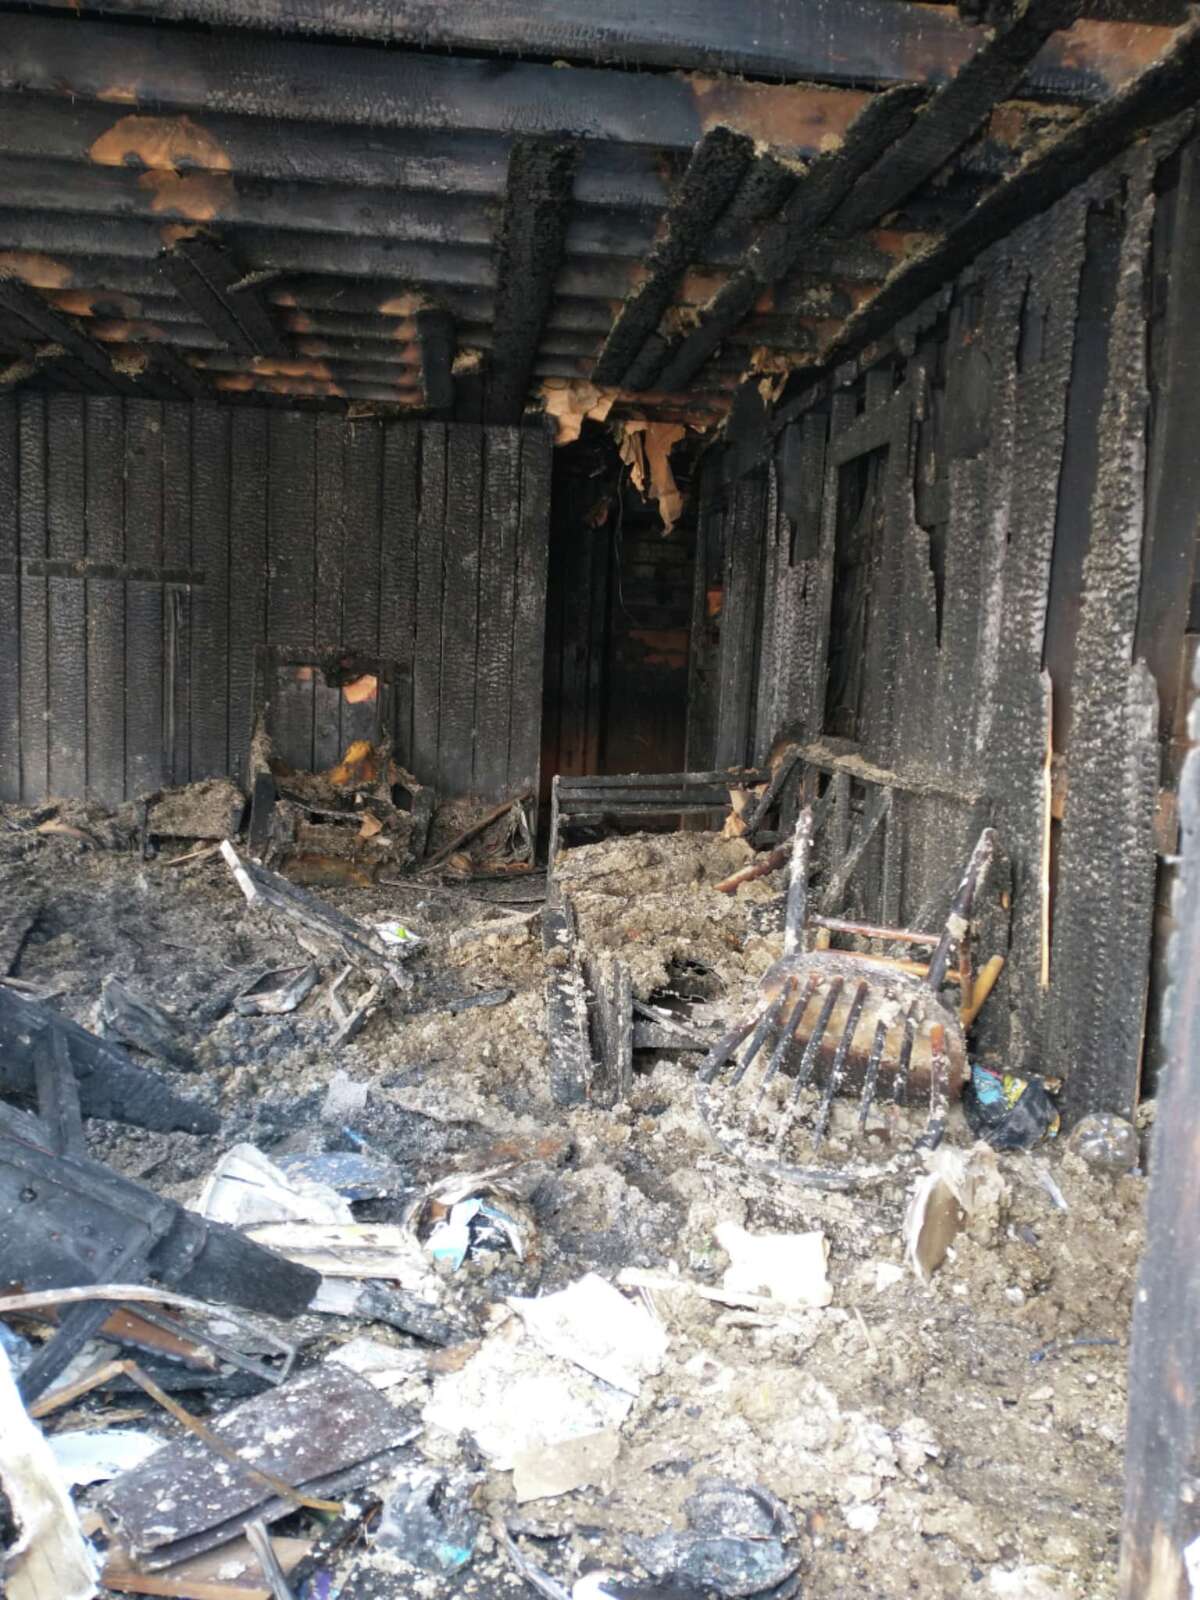 Two people escaped a Midland house fire Saturday morning on Parsons Court, but three family cats died in the blaze. The family had no insurance and a GoFundMe has been established.